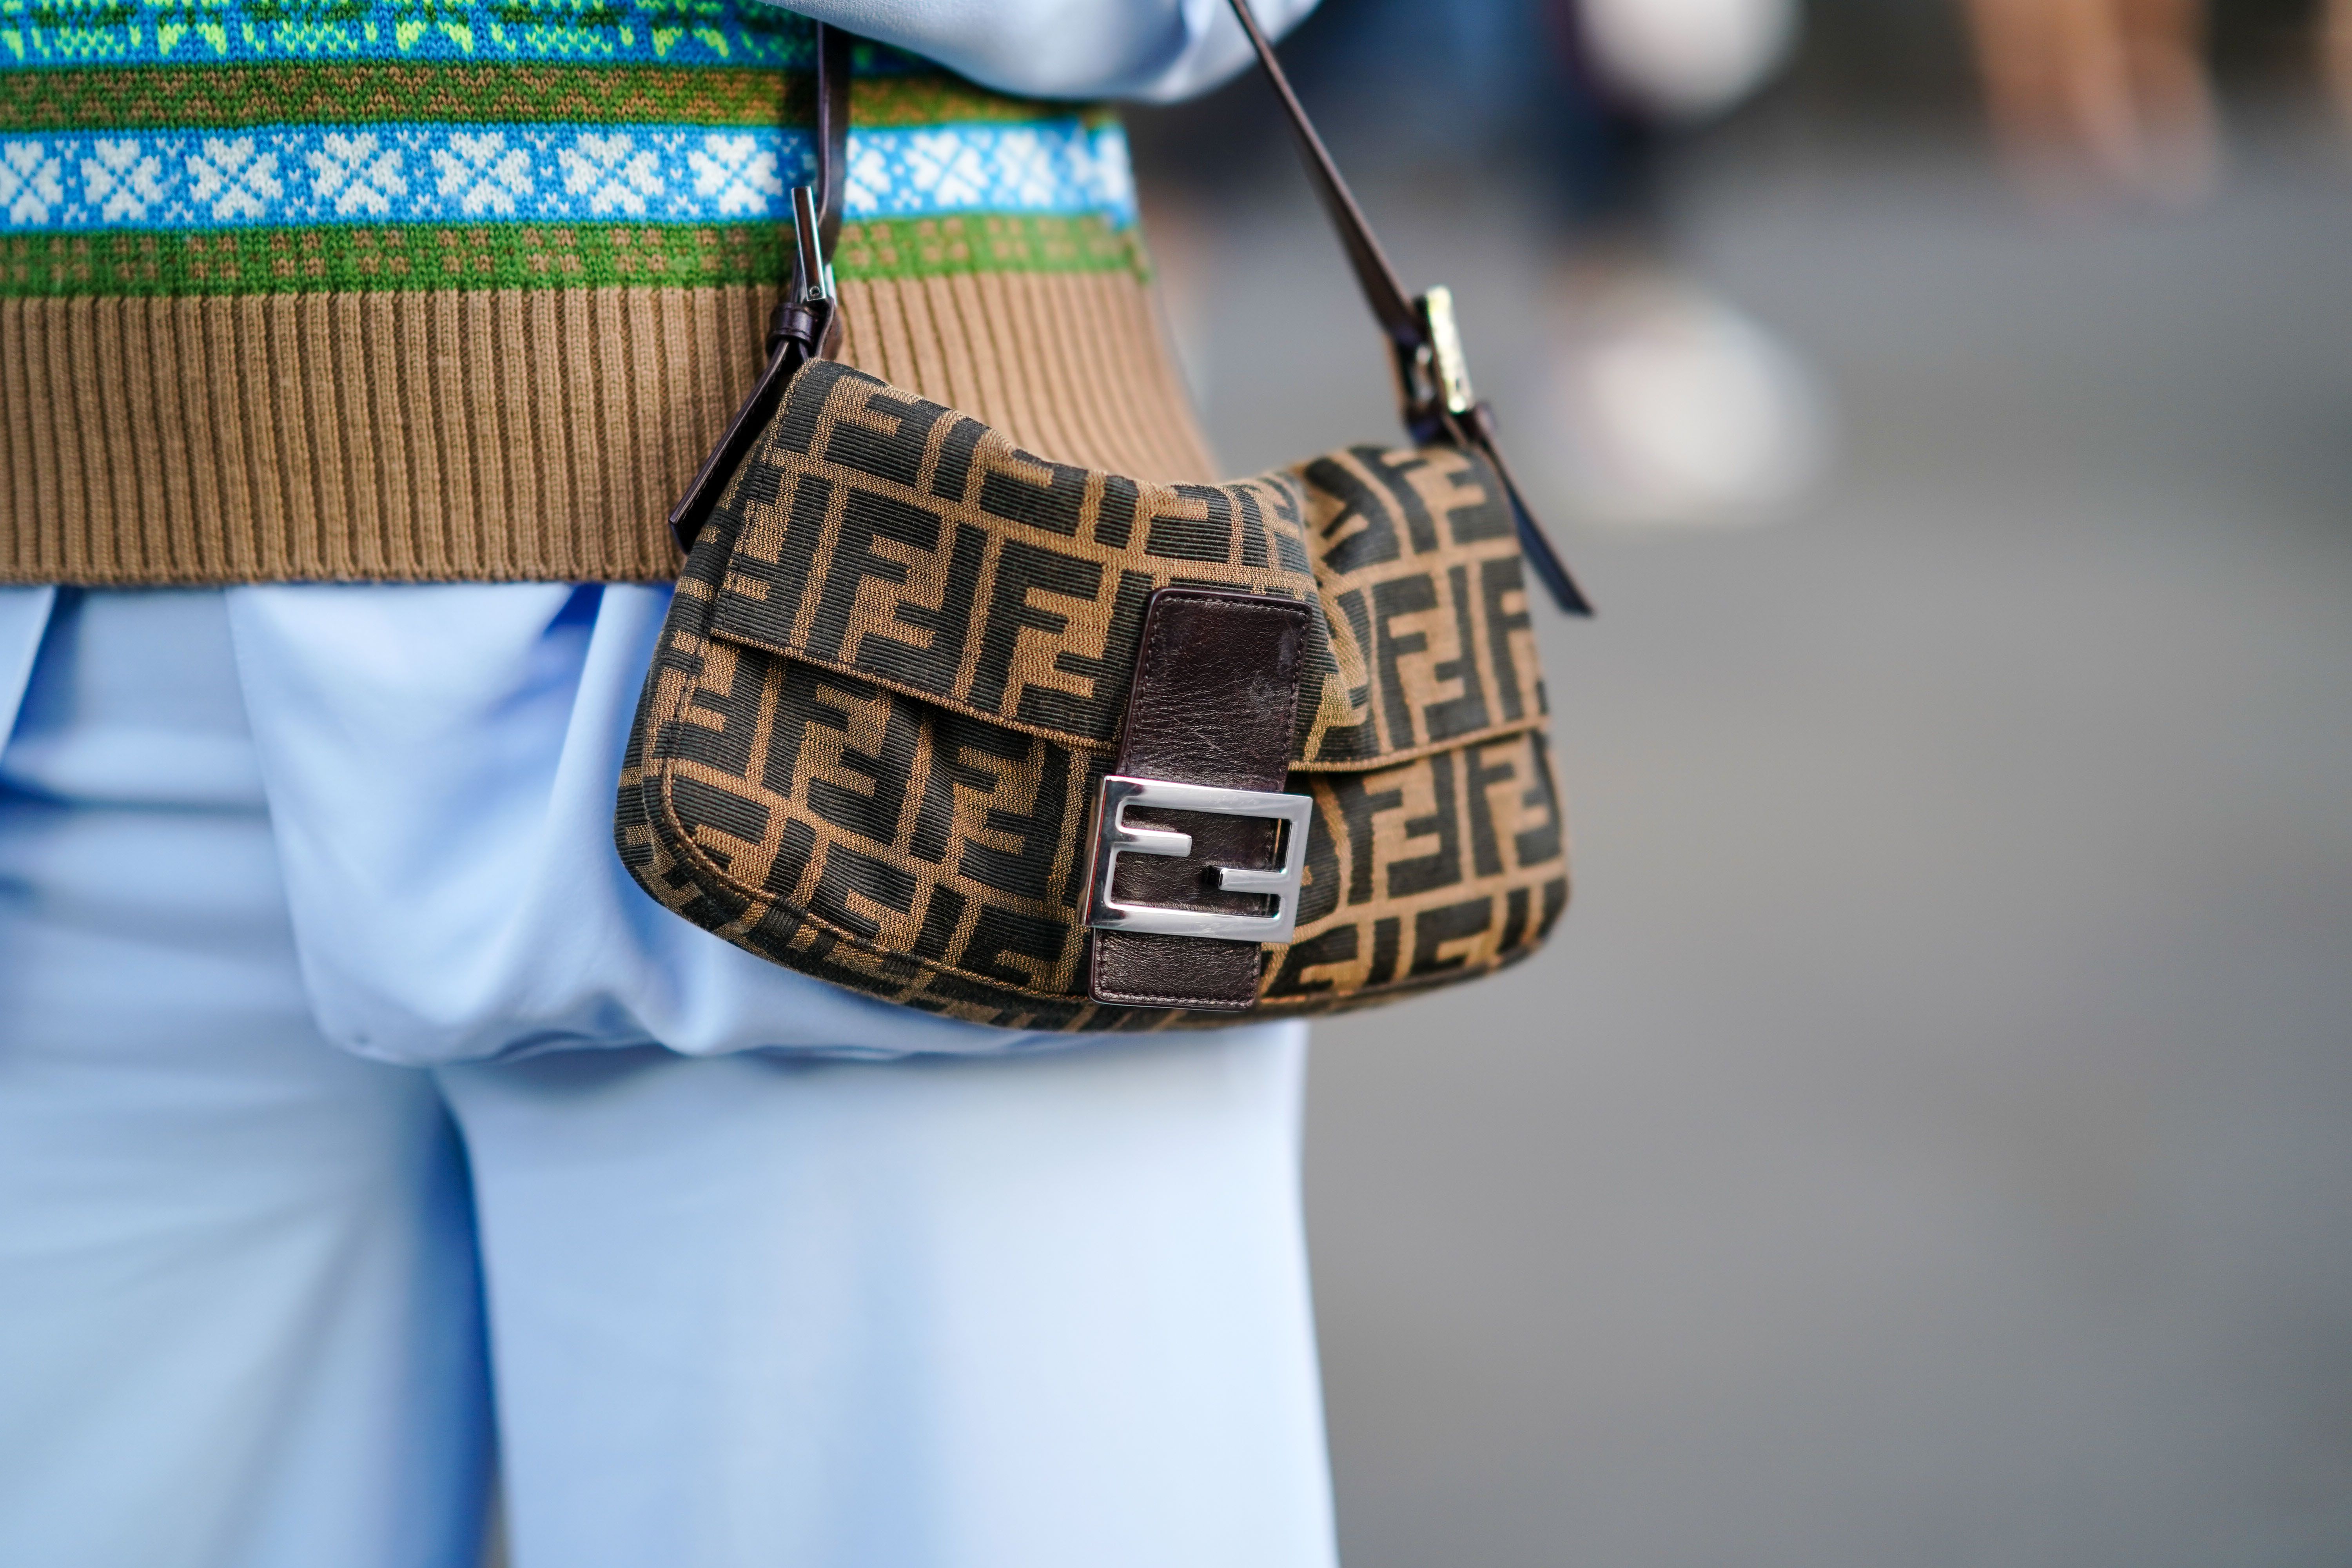 Fendi's Baguette – where to buy new secondhand